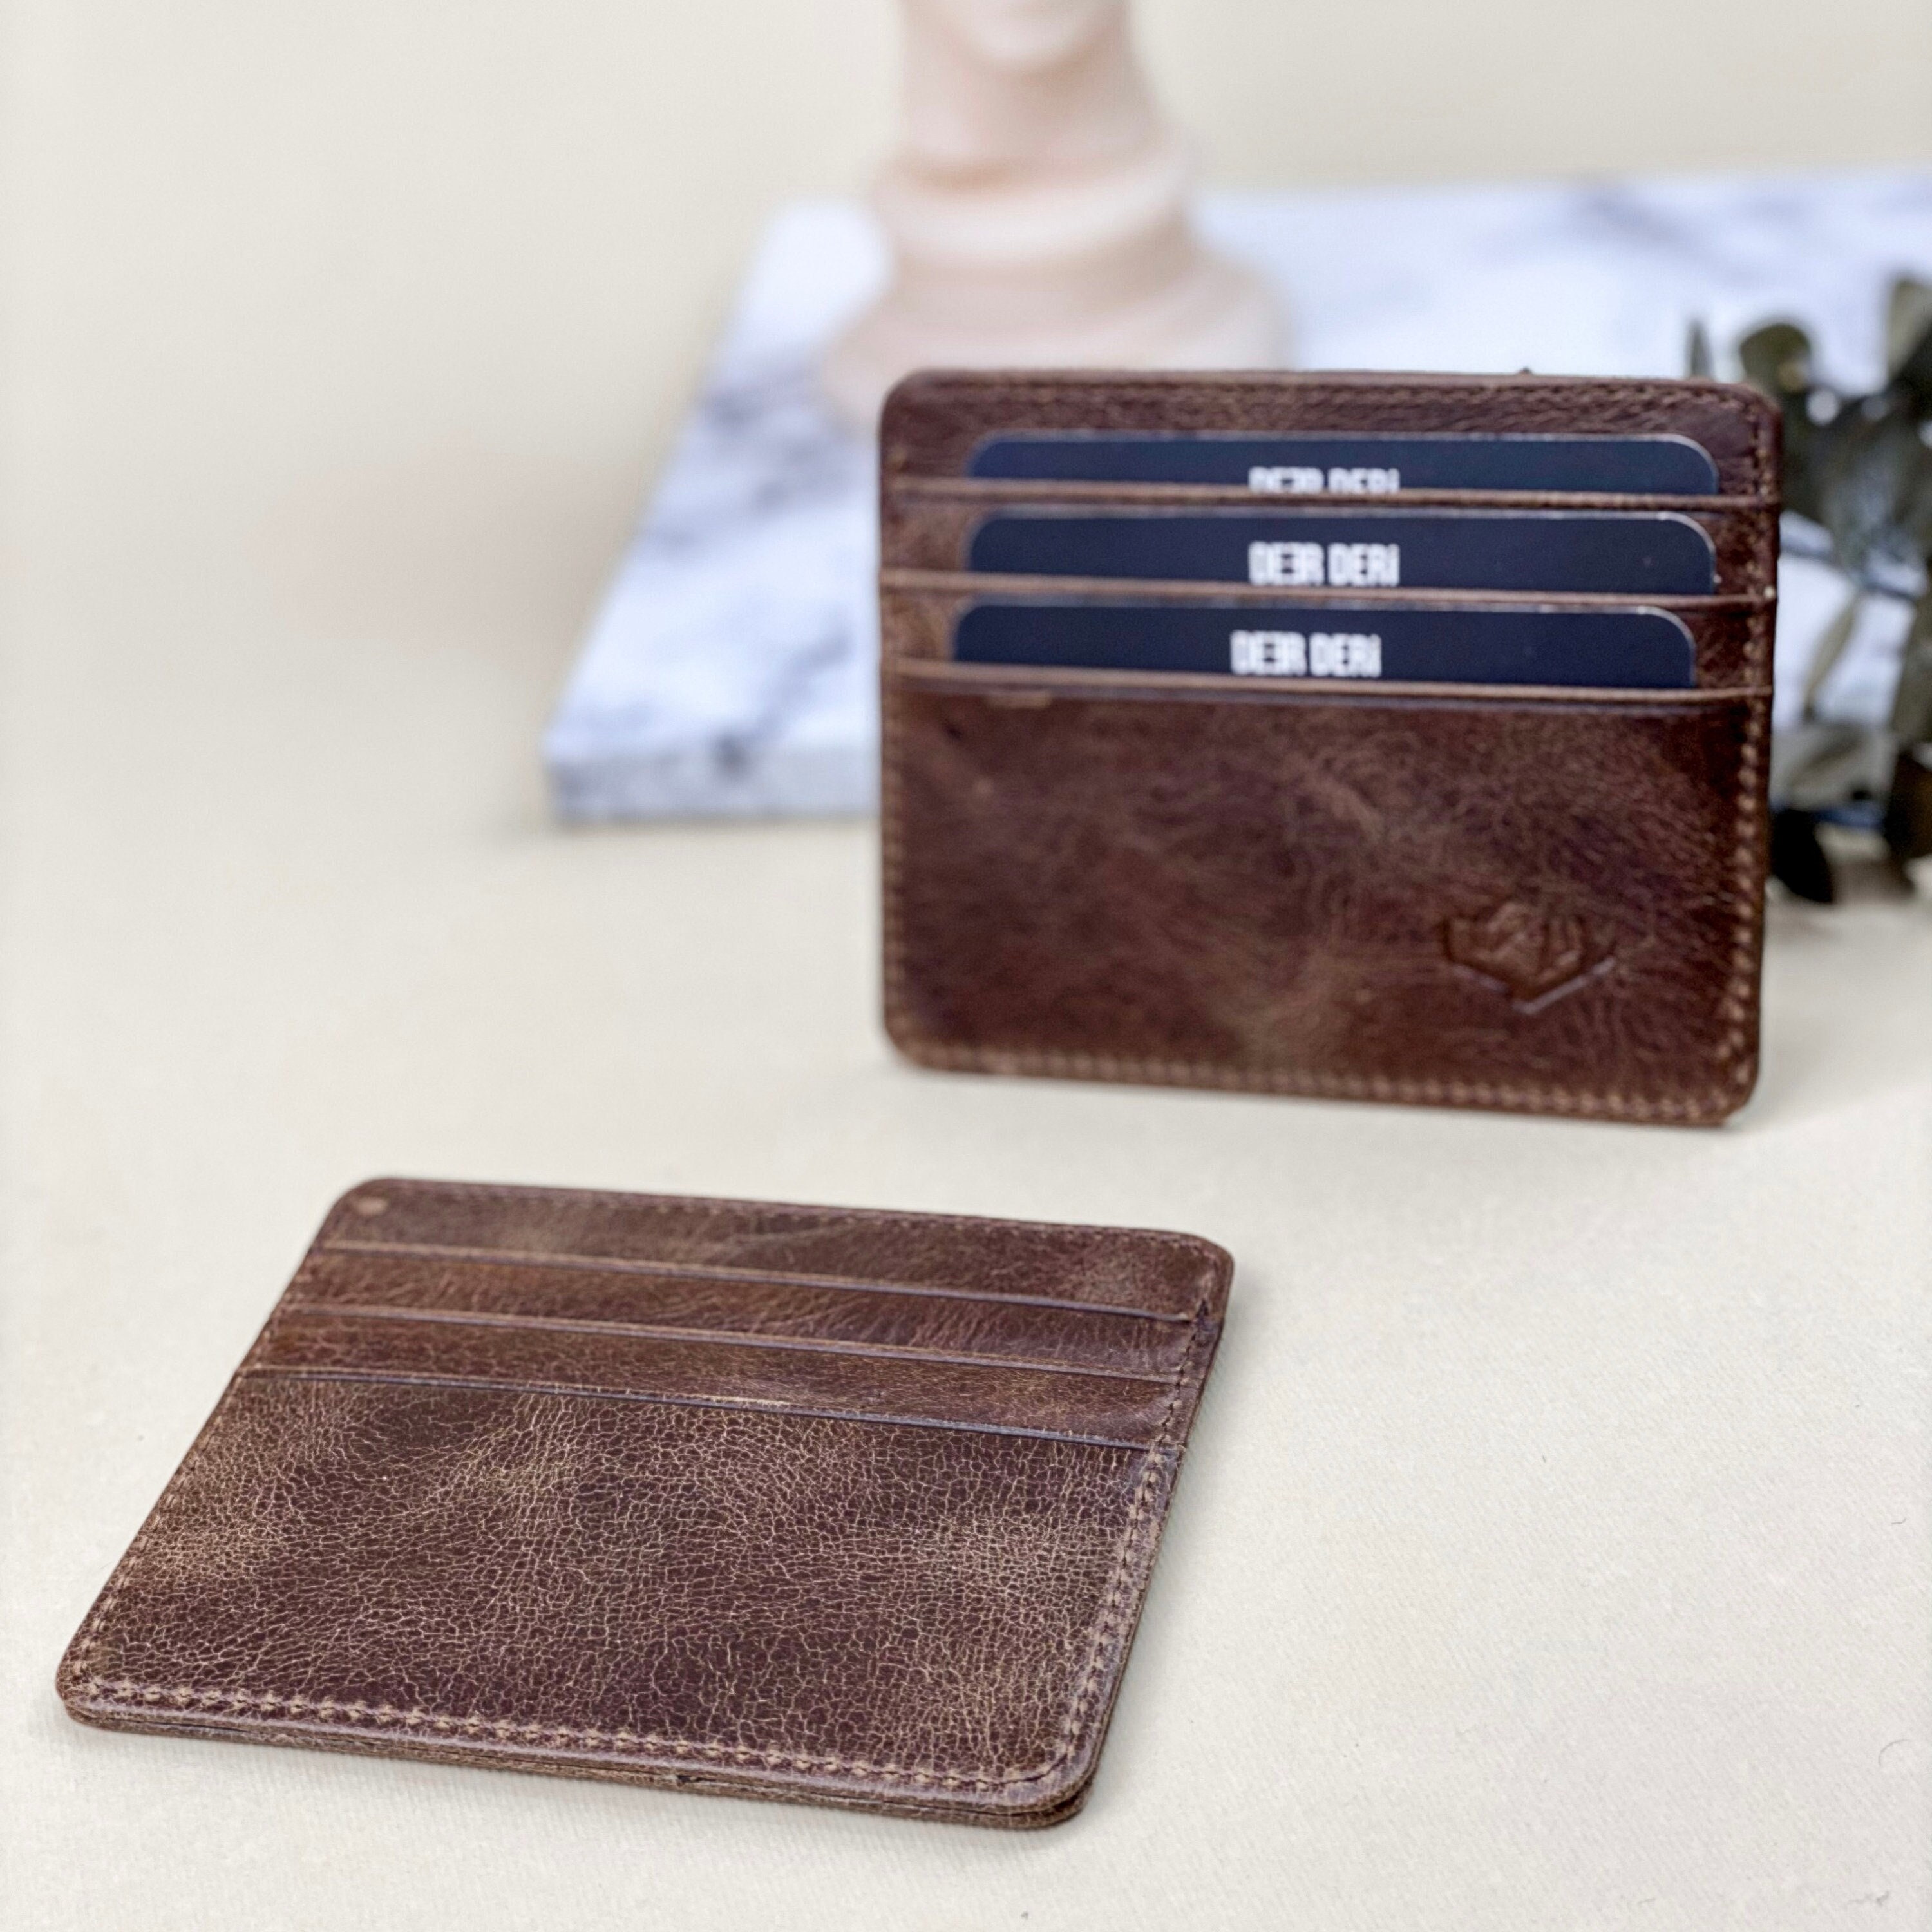 Buy Ozu® Stylish & Compact Design Card Holder for Coin, Money, Credit Card,  Debit Card, ID Card Case Multi Card Slots Strong Zipper Wallet for Unisex  (Cream Square Pattern Golden Zip) at